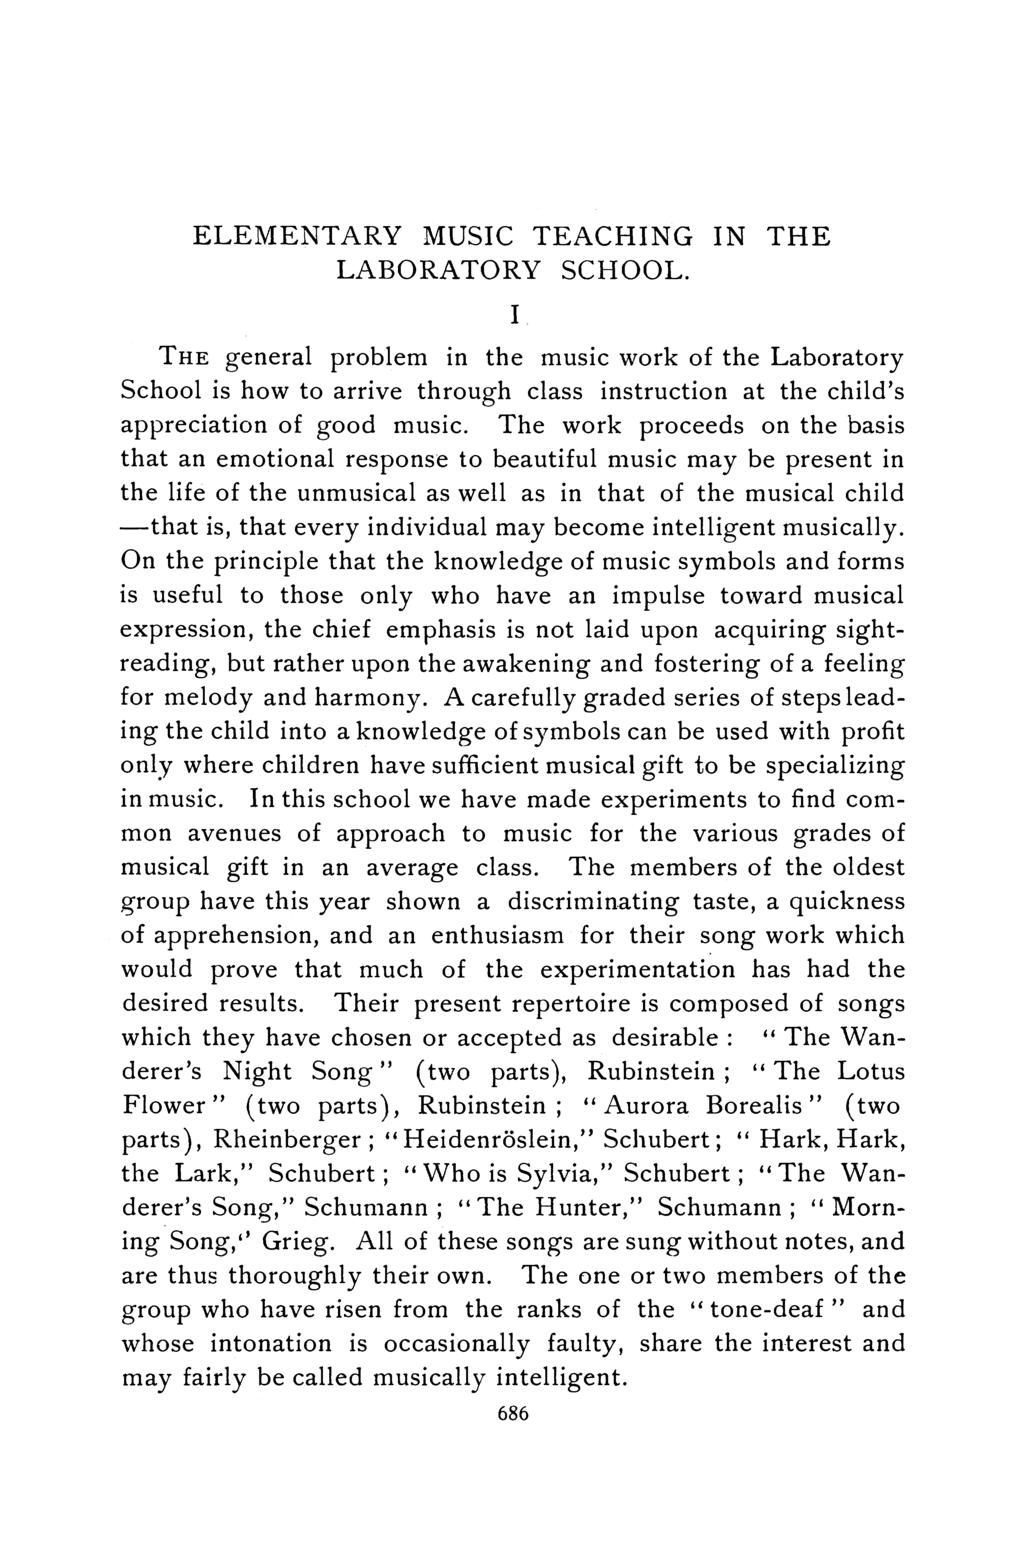 ELEMENTARY MUSIC TEACHING IN THE LABORATORY SCHOOL. THE general problem in the music work of the Laboratory School is how to arrive through class instruction at the child's appreciation of good music.